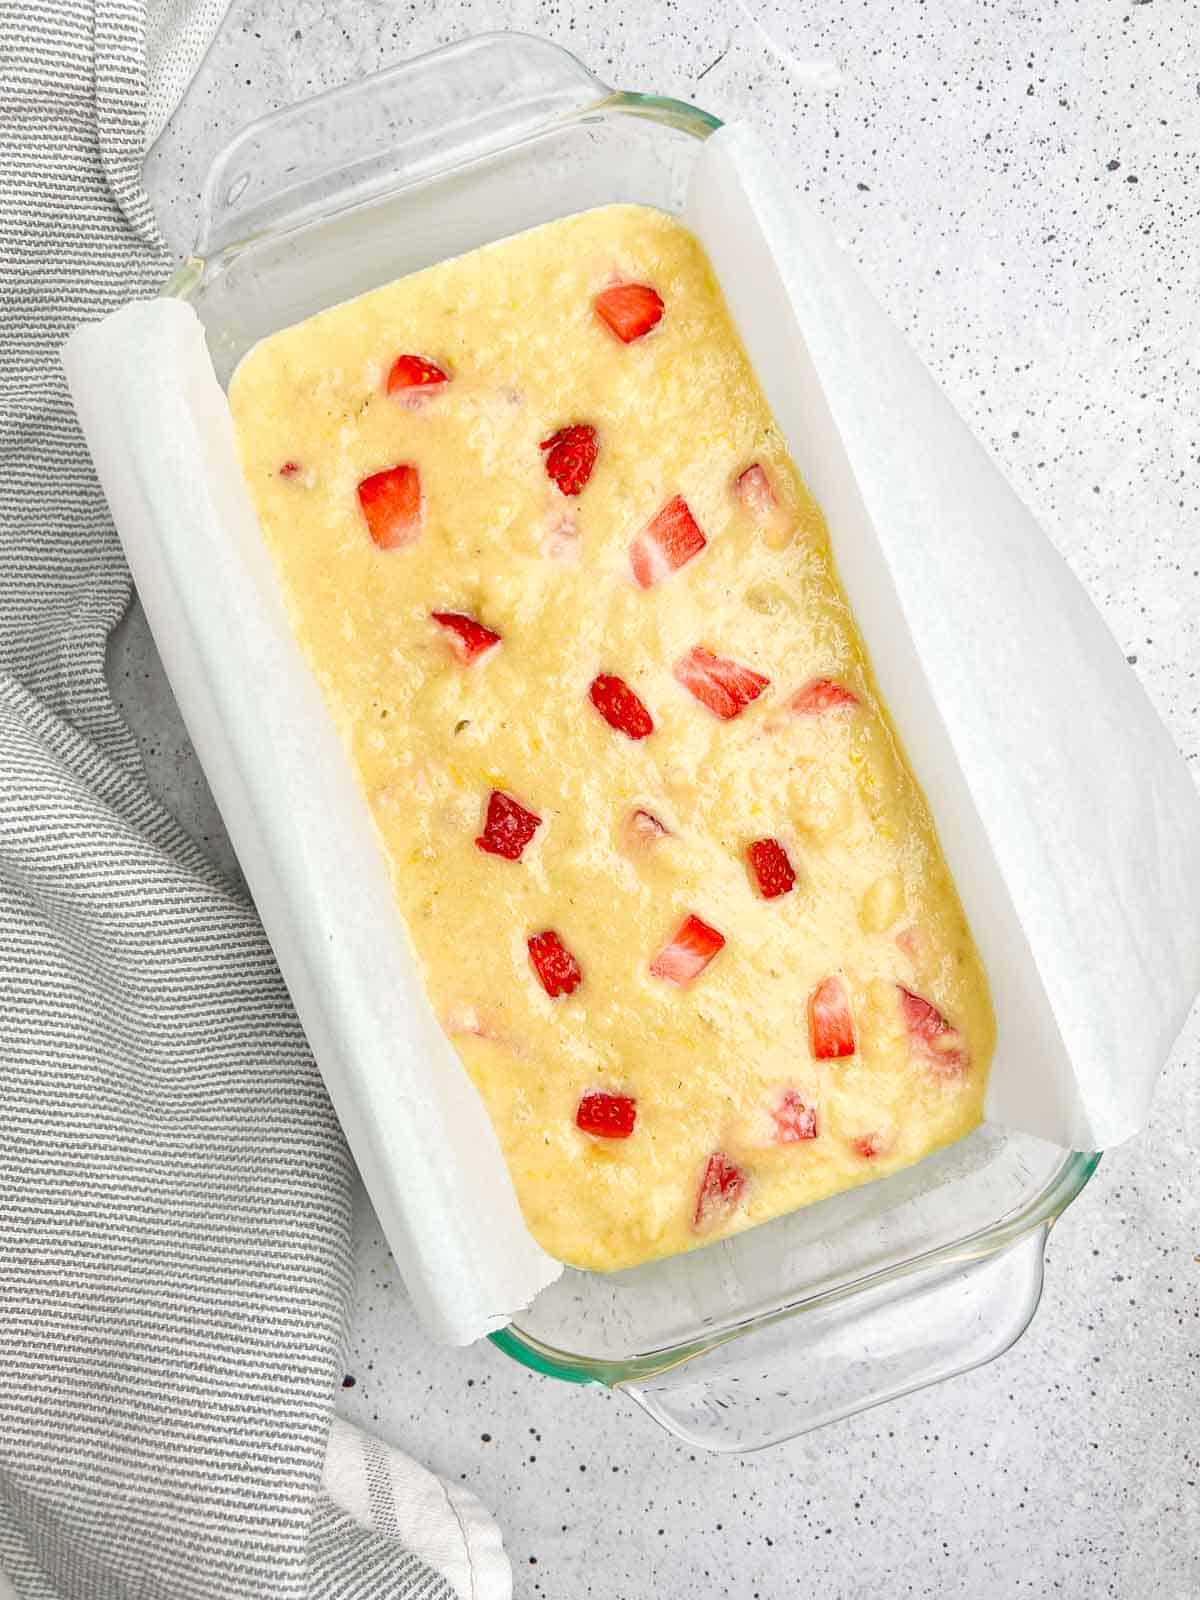 Gluten-free almond flour strawberry banana bread in a loaf pan ready to bake.